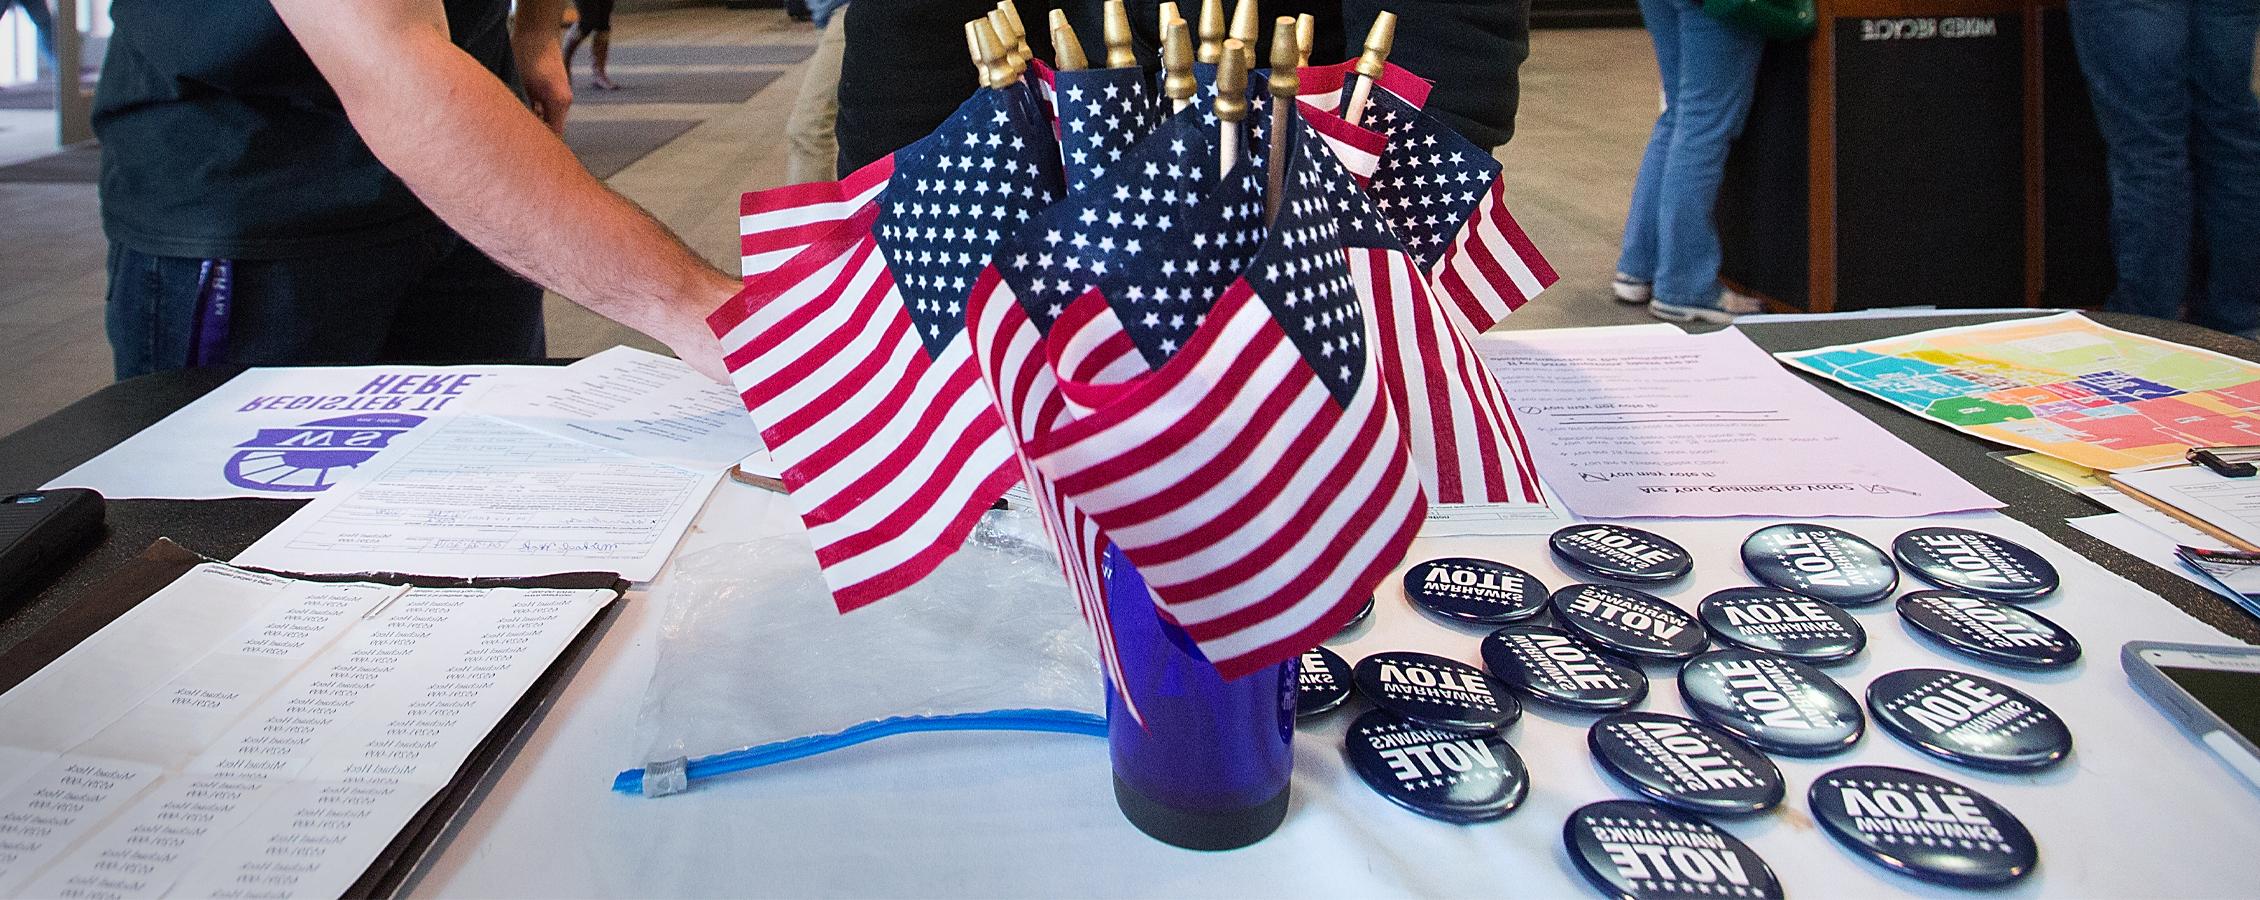 American flags and Warhawks Vote buttons sit on a table.